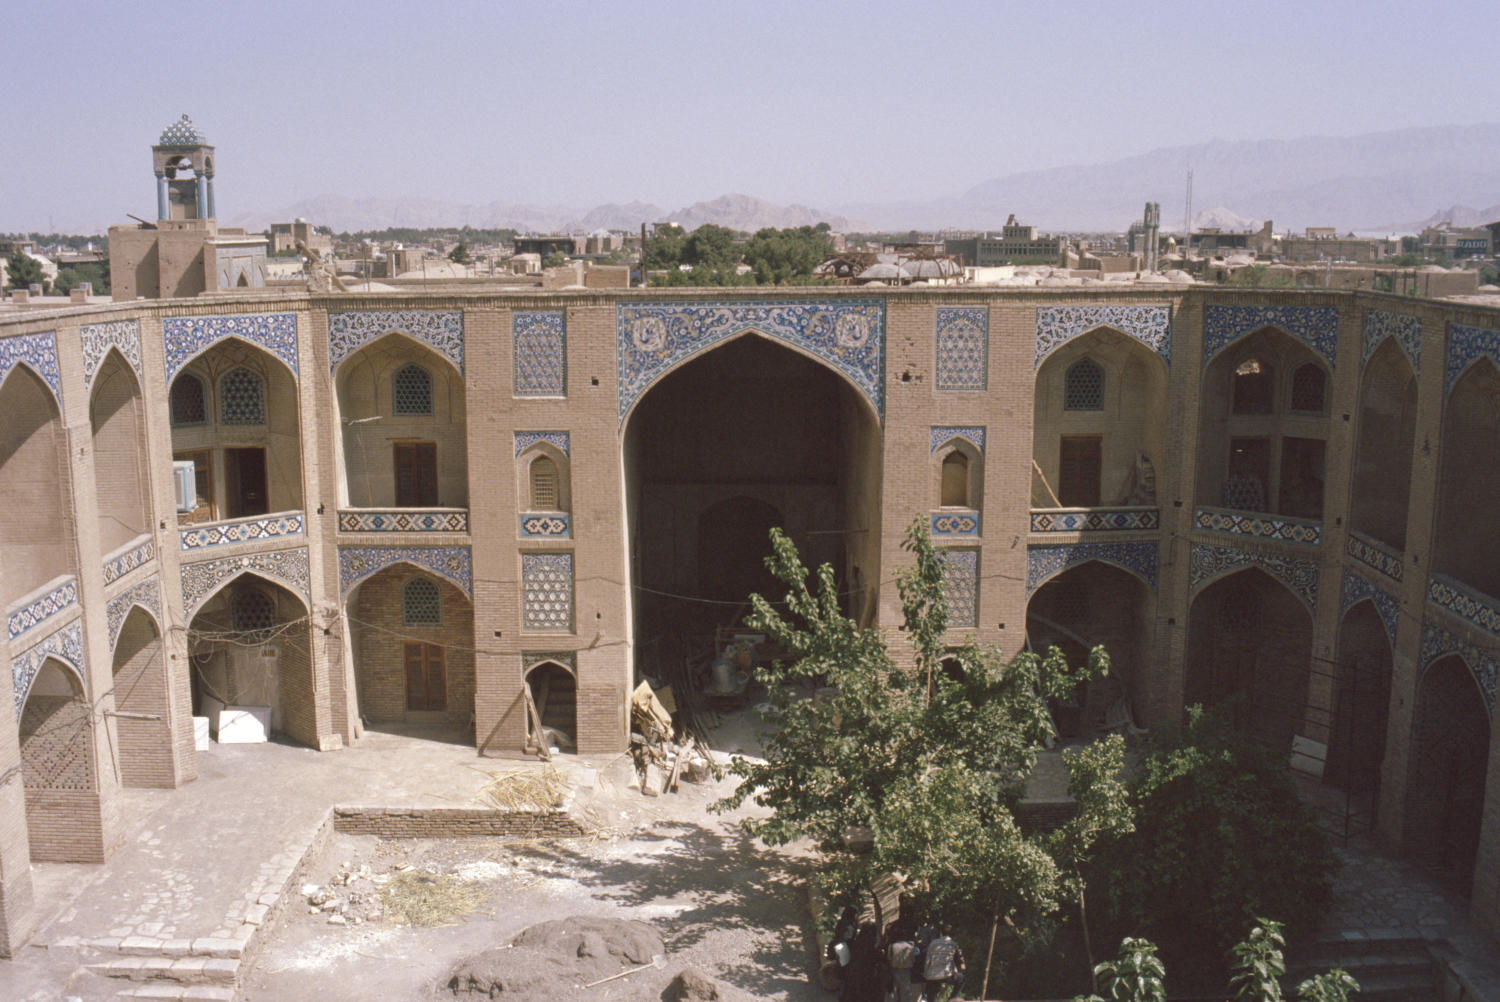 Elevated view of madrasa courtyard.